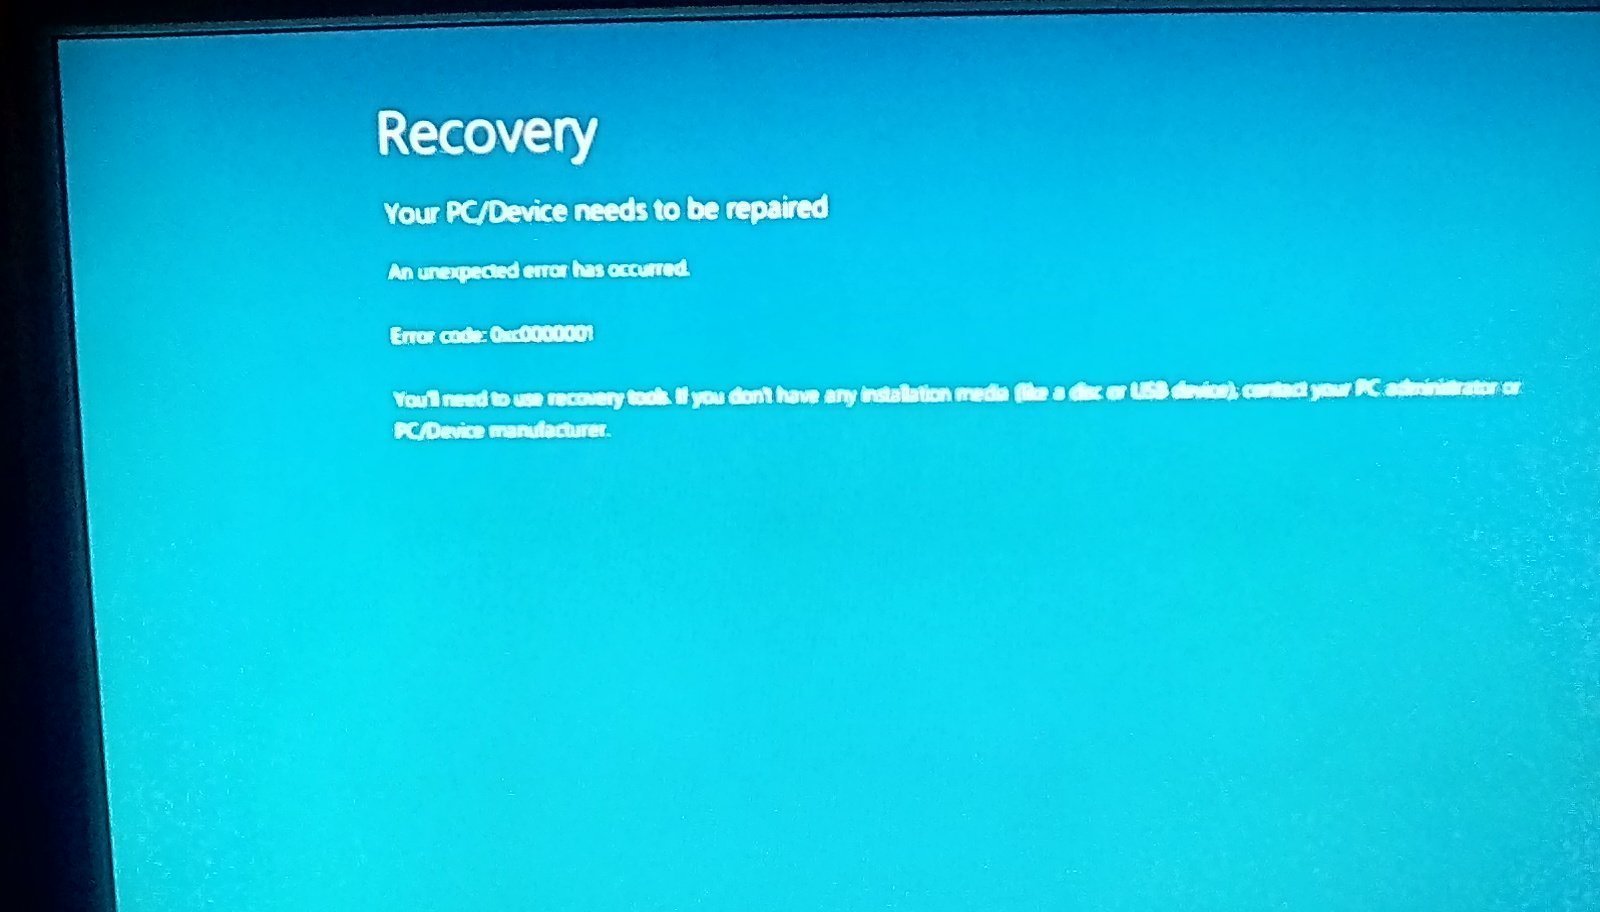 Windows 10 "Recovery, Your PC/Device needs to be repaired" Error code: 0xc0000001 7ec93e35-1f07-4286-b645-932bd76719f8?upload=true.jpg